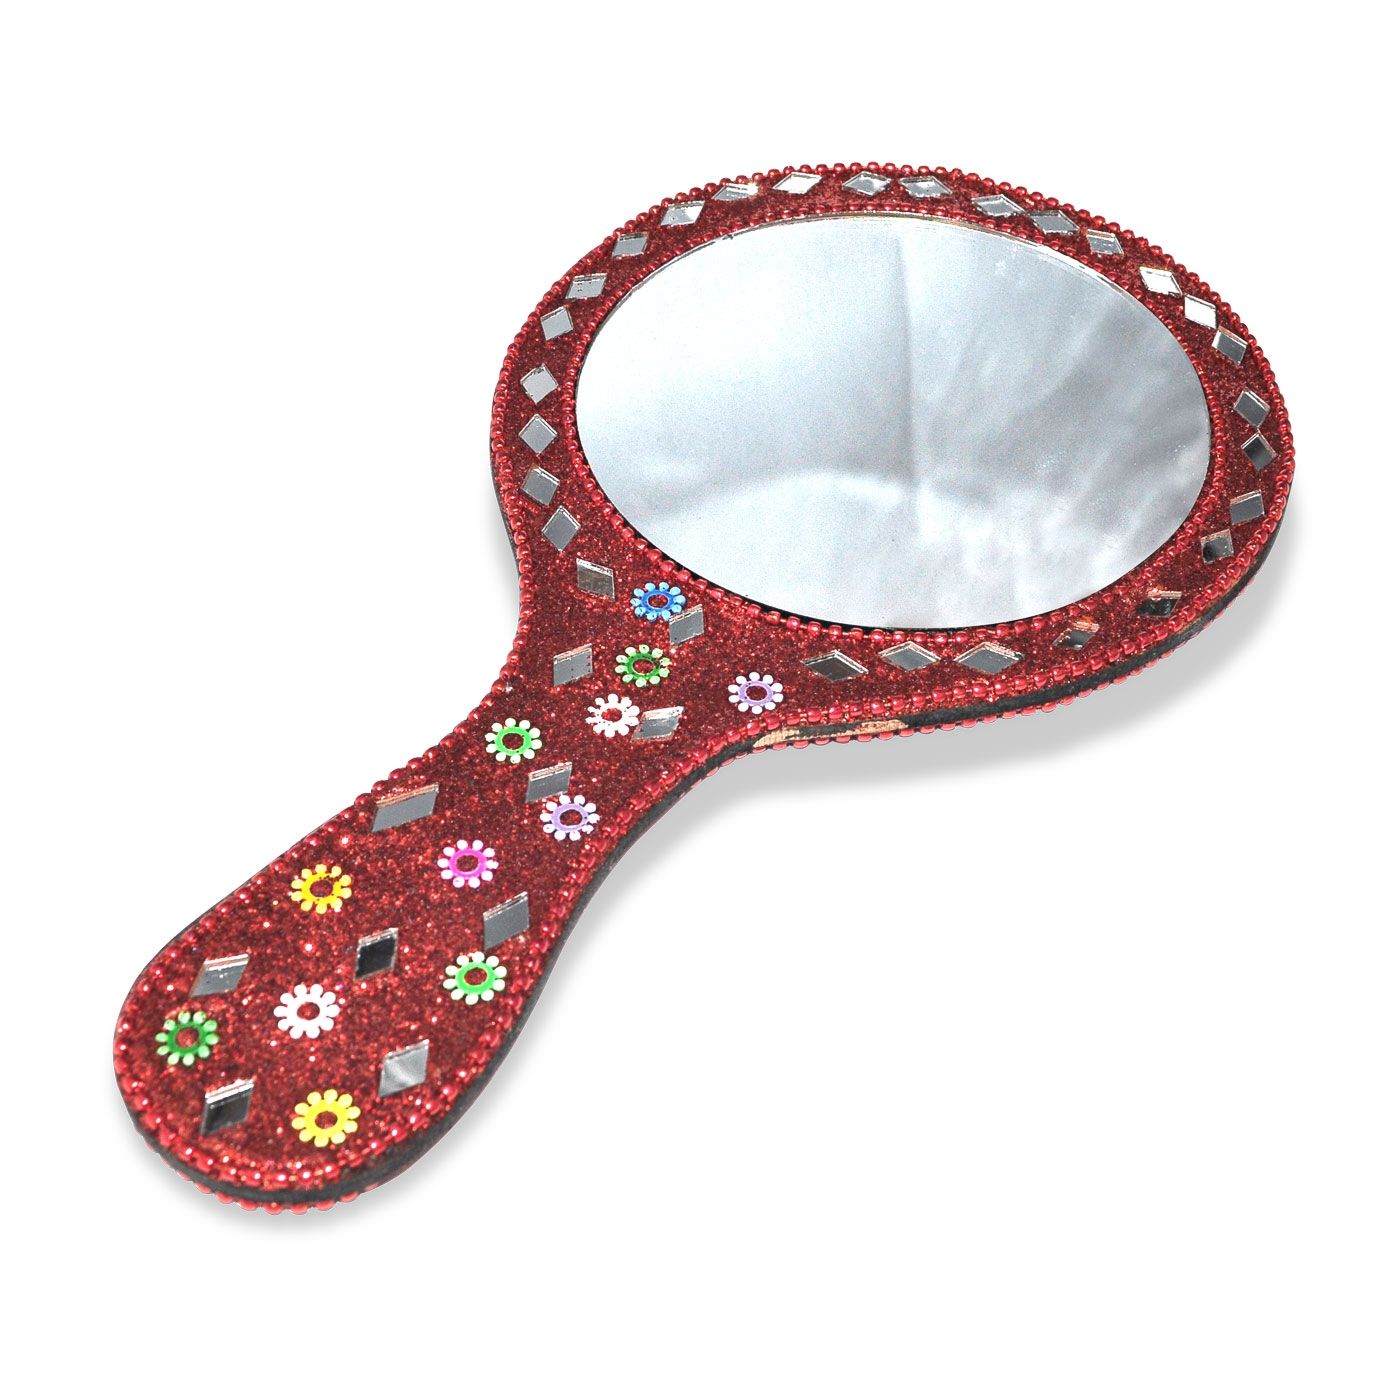 Hand Held Mirror Best Make Up Mirror Hand Mirror Pinterest Pertaining To Fancy Mirrors For Sale (View 9 of 14)